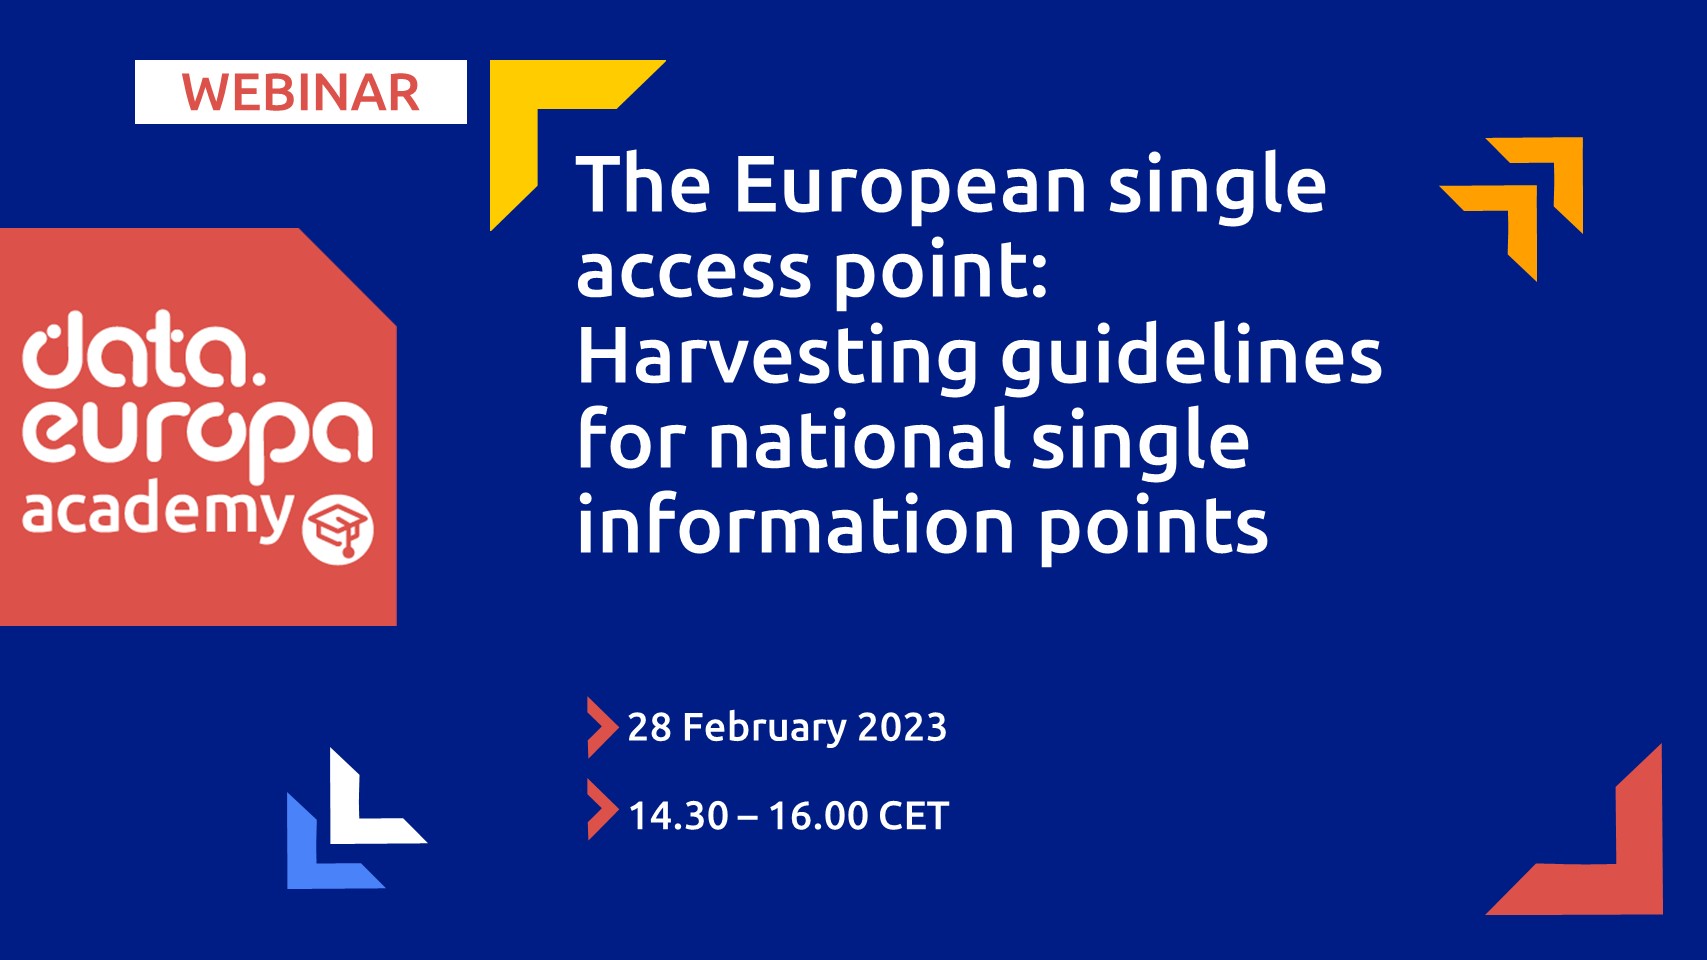 The European single access point: Harvesting guidelines for national single information points